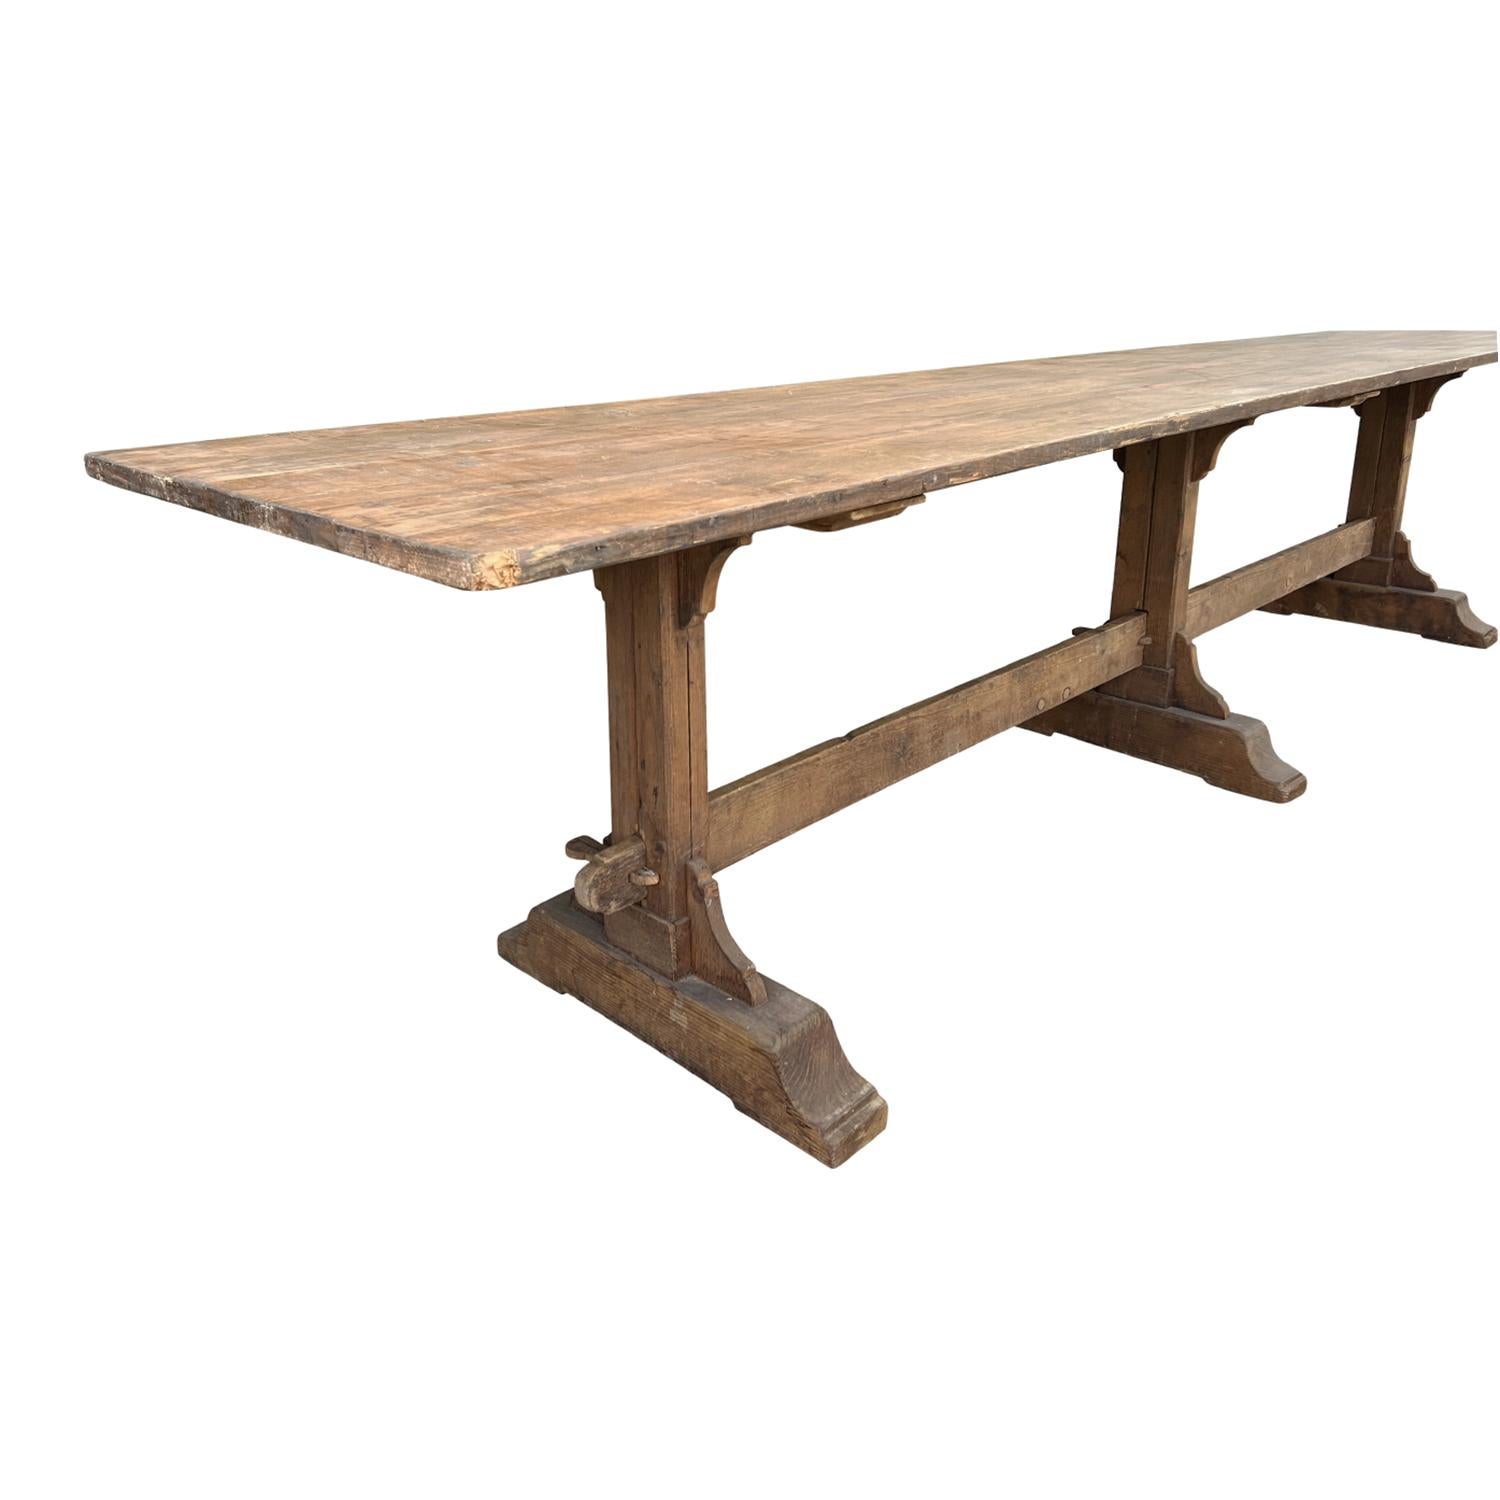 Hand-Carved 19th Century French Pinewood Trestle Table - Antique Dining Room Table For Sale